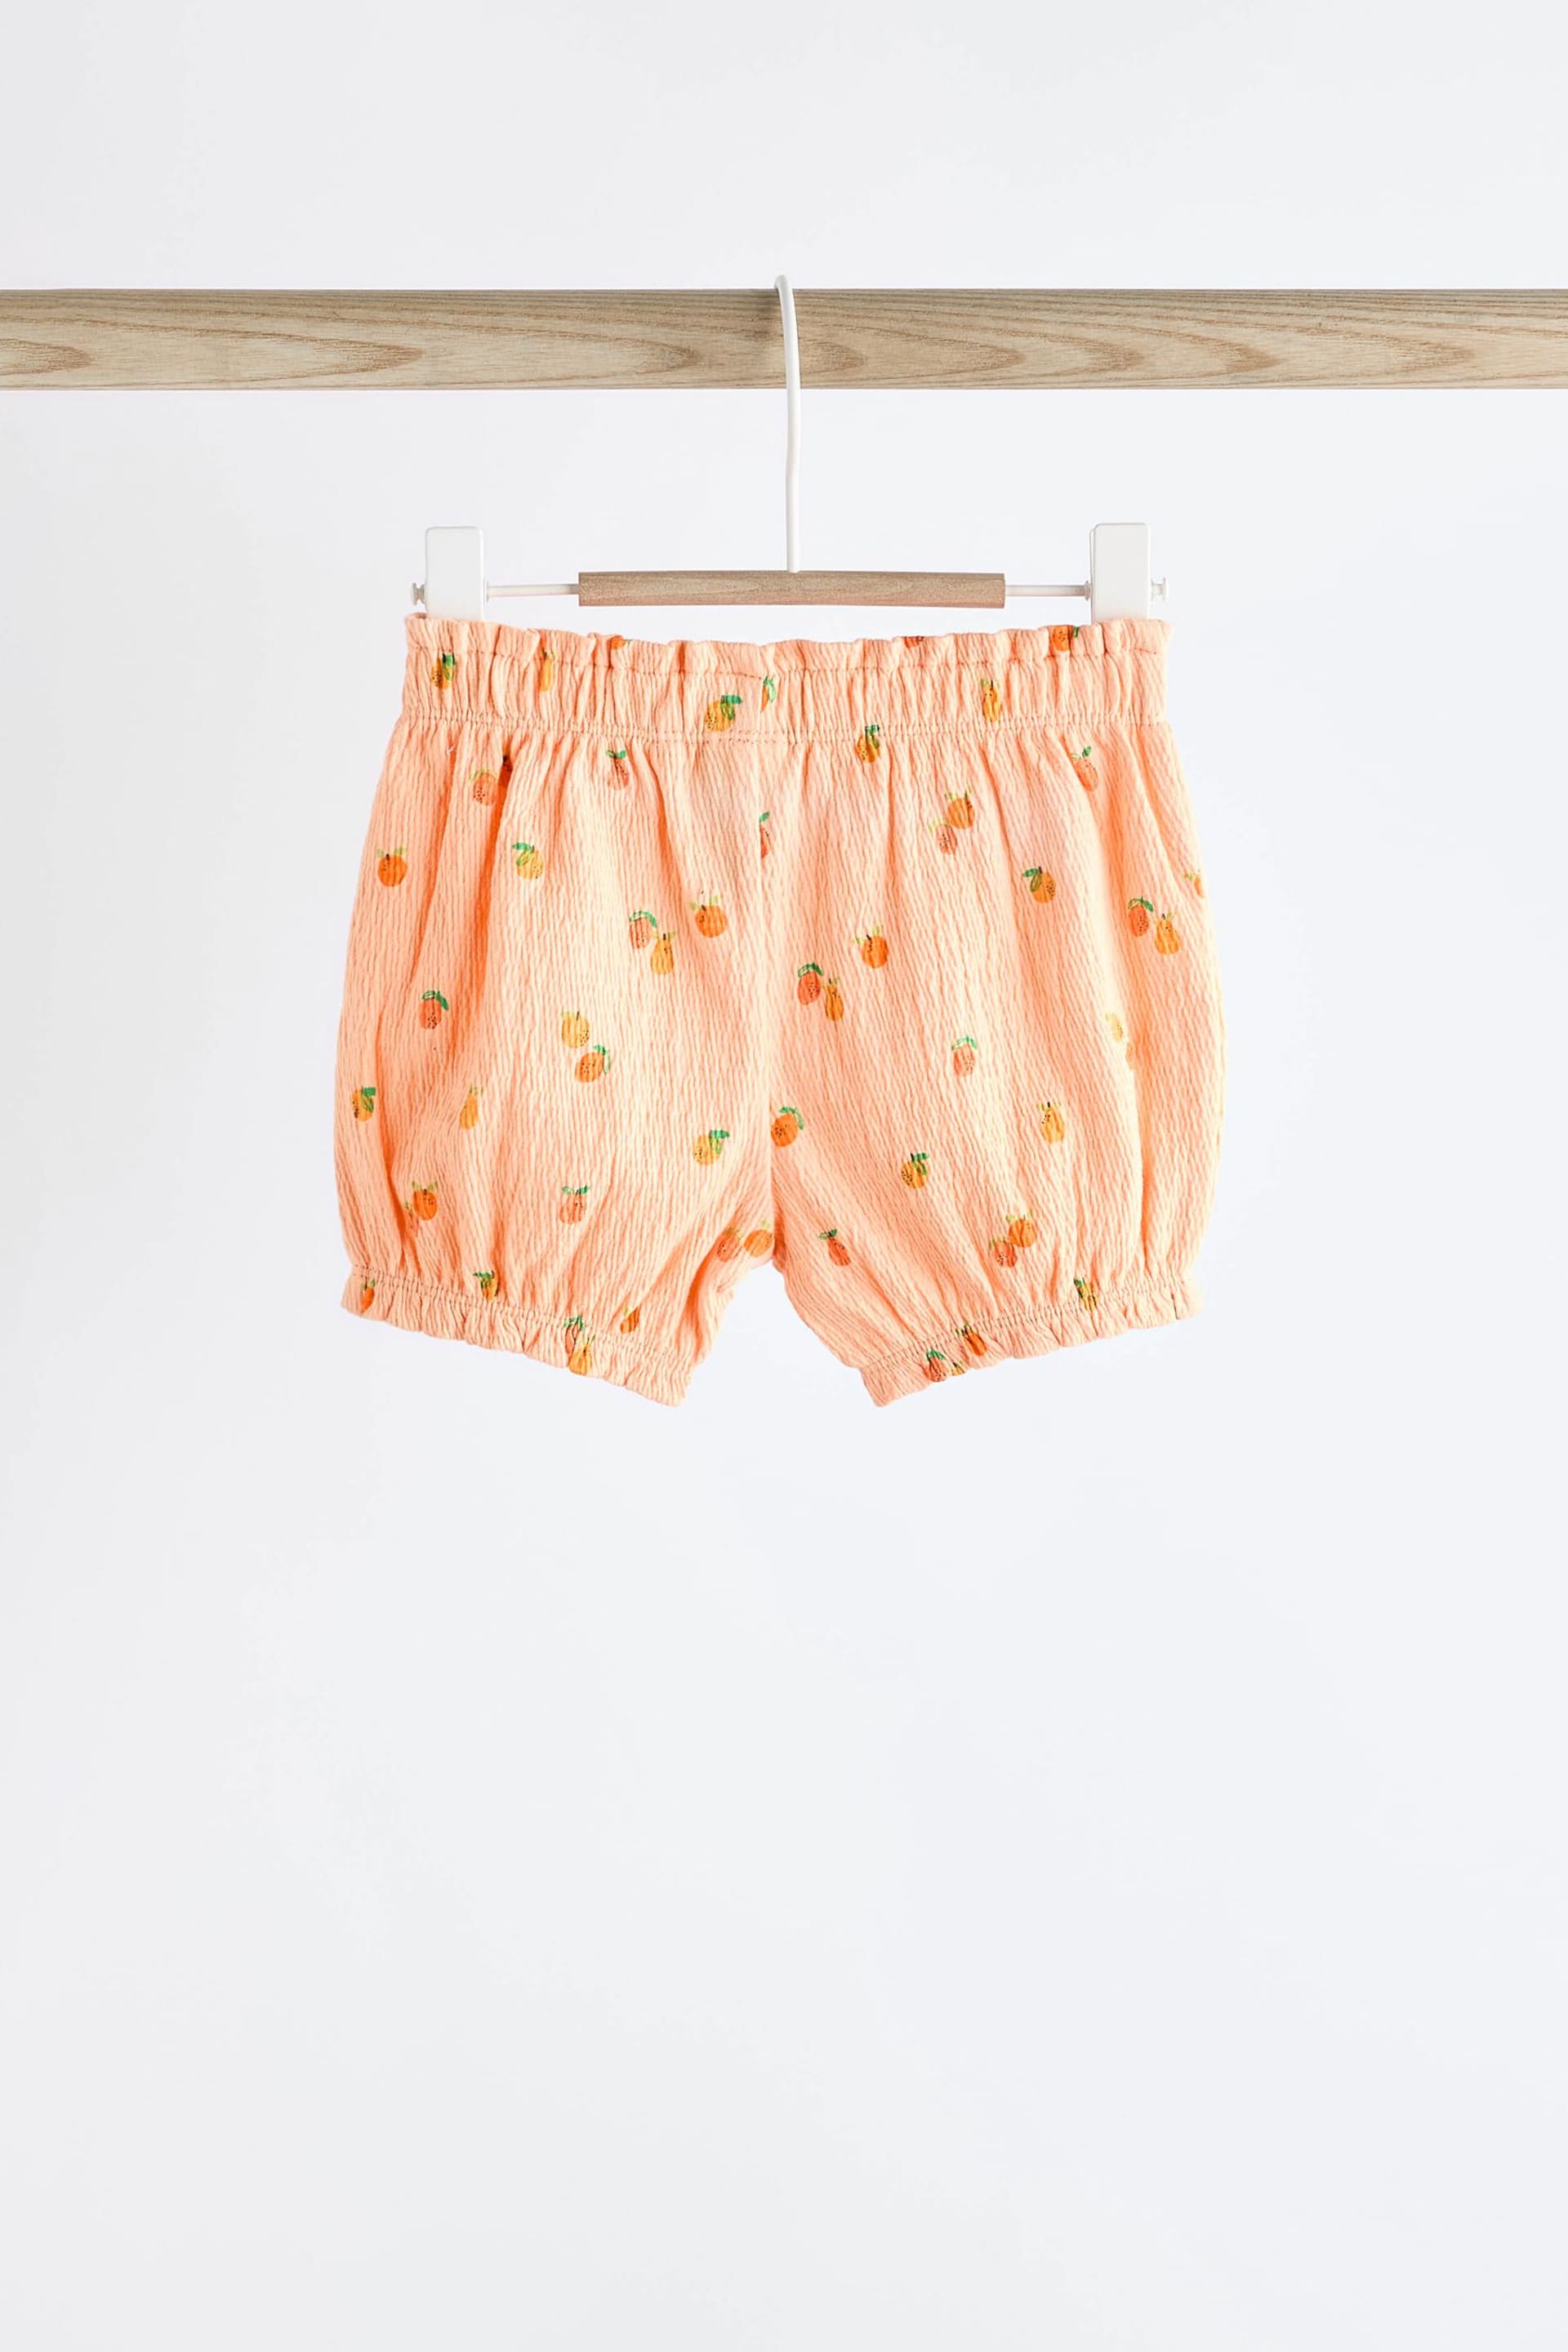 Orange Baby Top and Shorts 2 Piece Set - Image 4 of 7